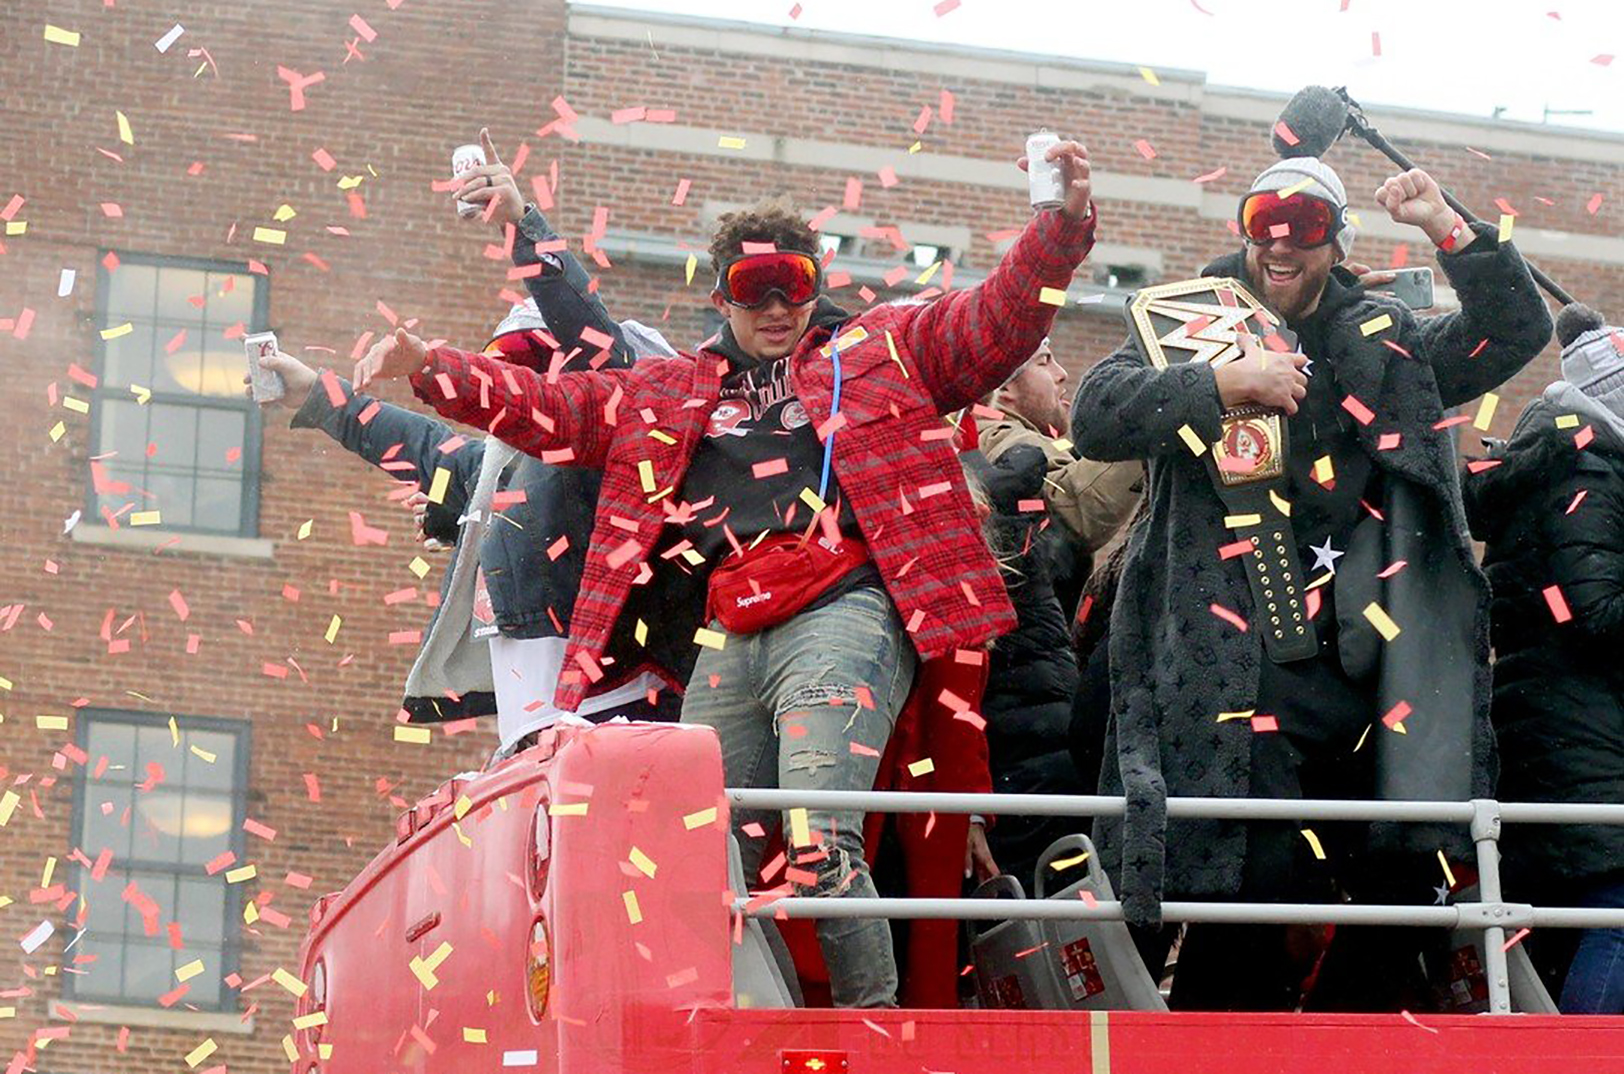 Cost of victory: Potential Super Bowl parade would bring hefty price tag to KCMO